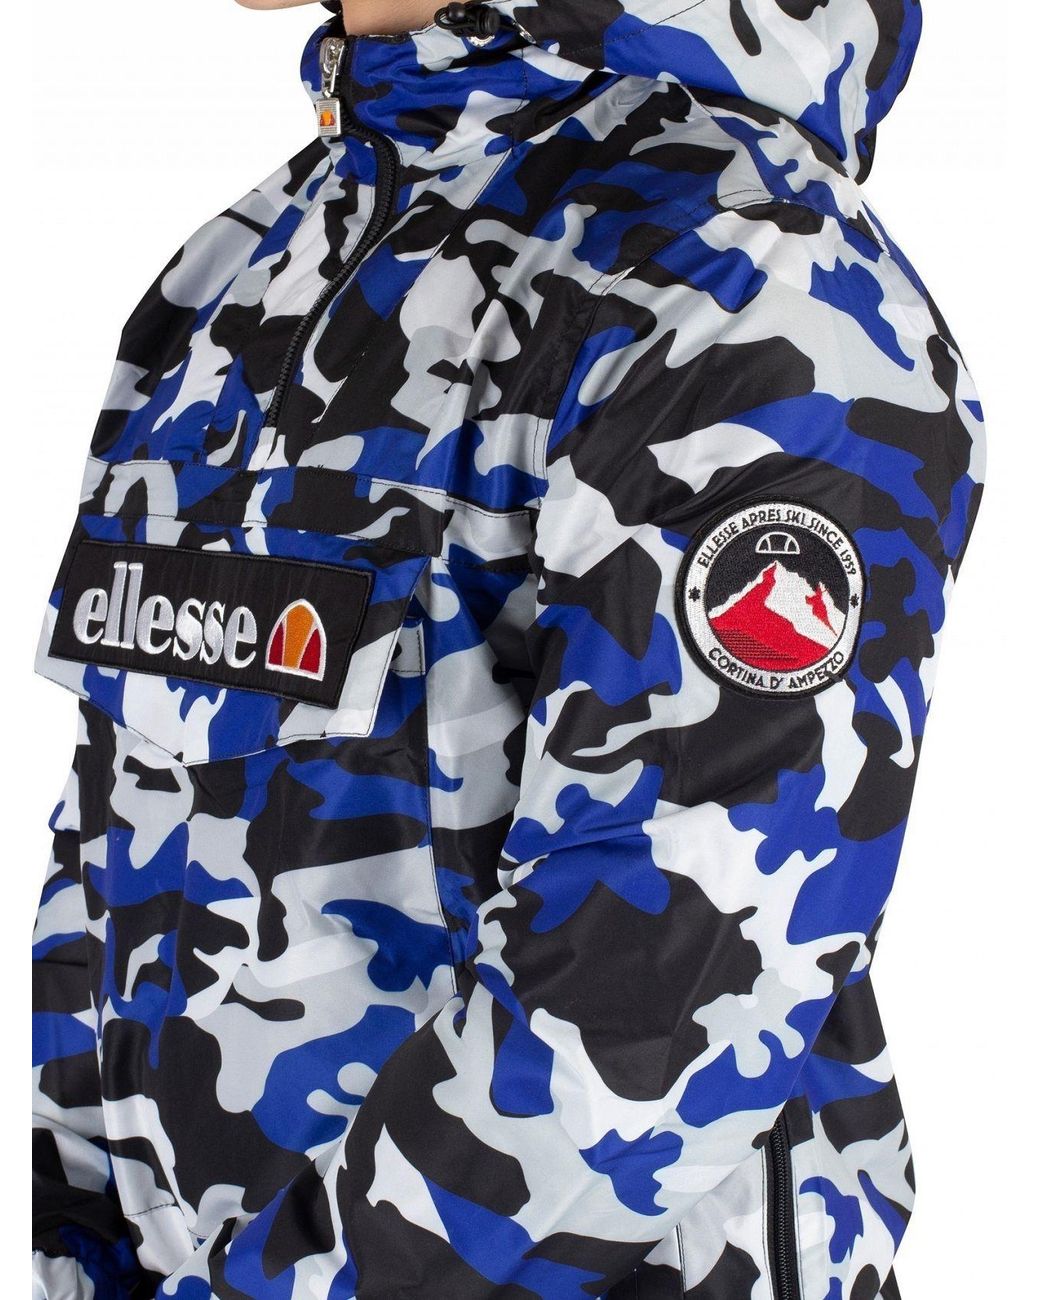 Ellesse Camo Mont 2 Jacket in for | Lyst Canada